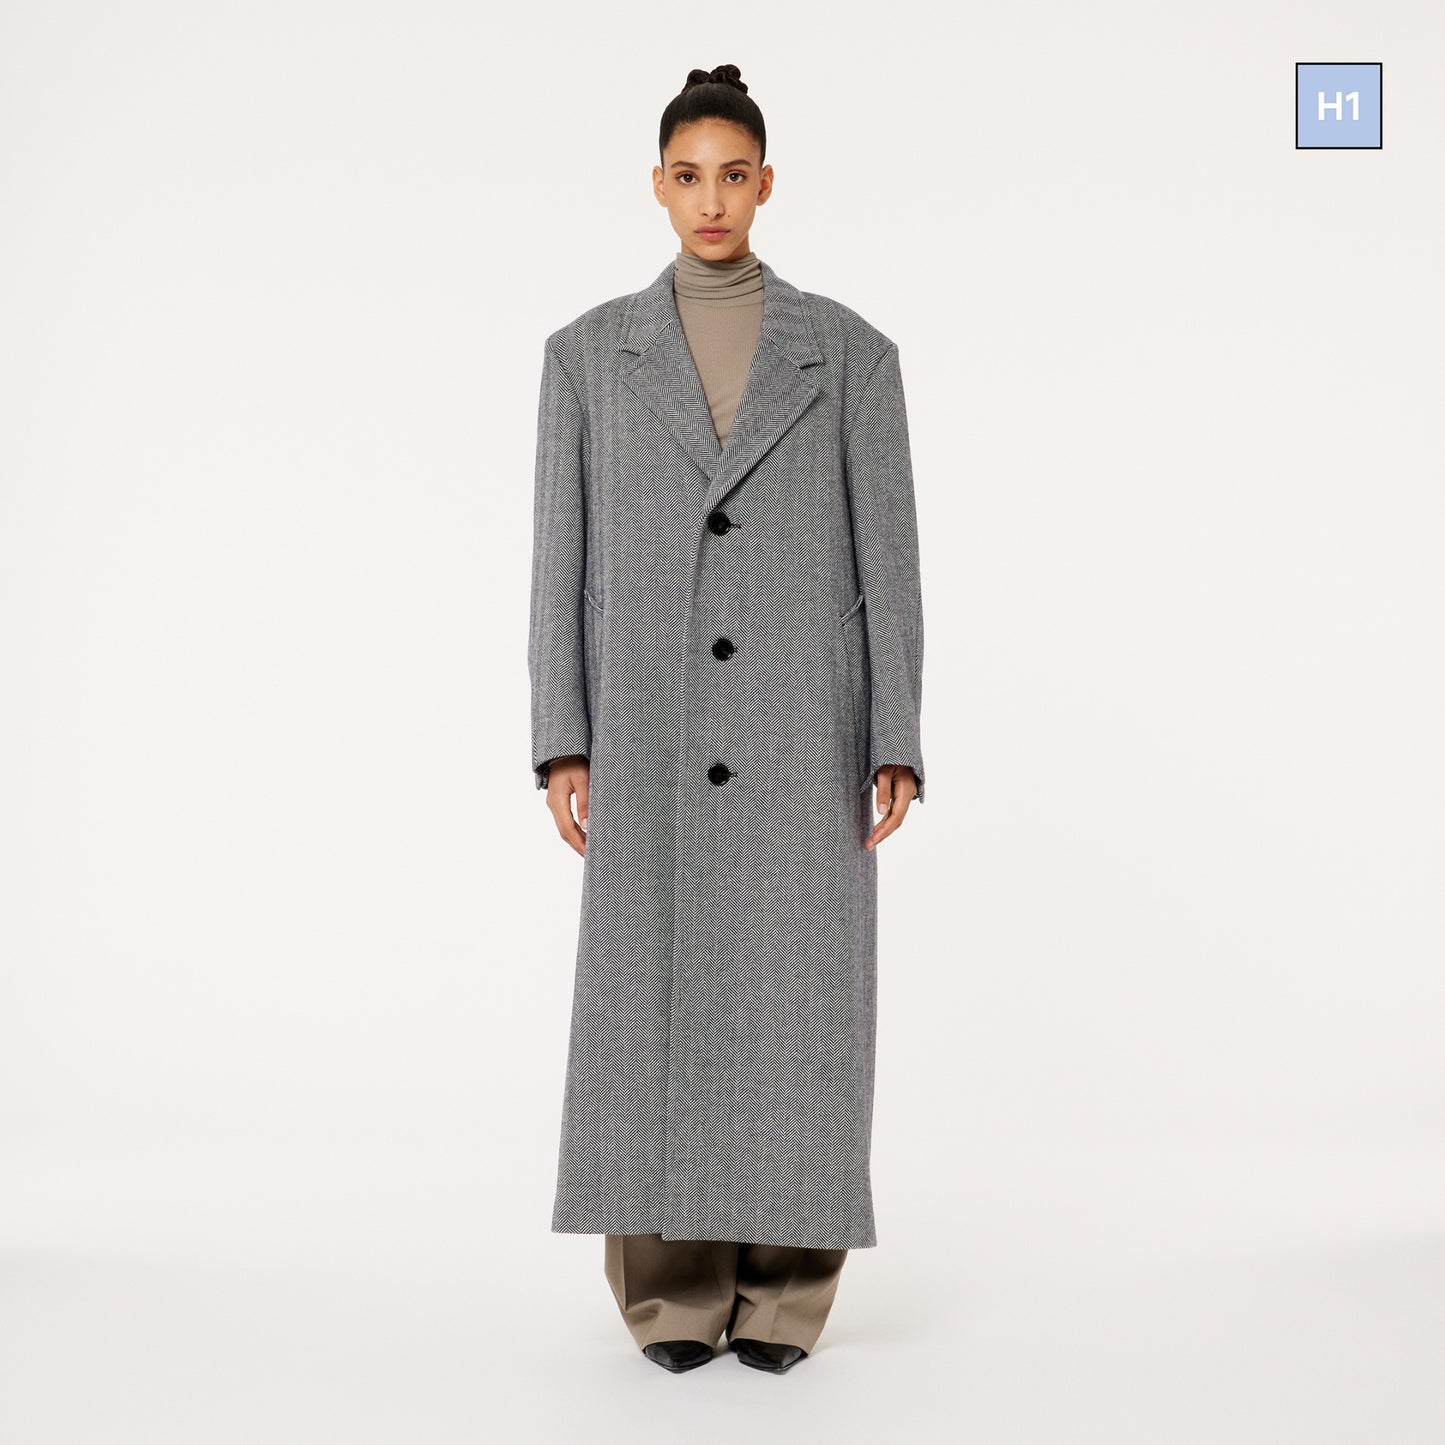 THREE BUTTONS COAT